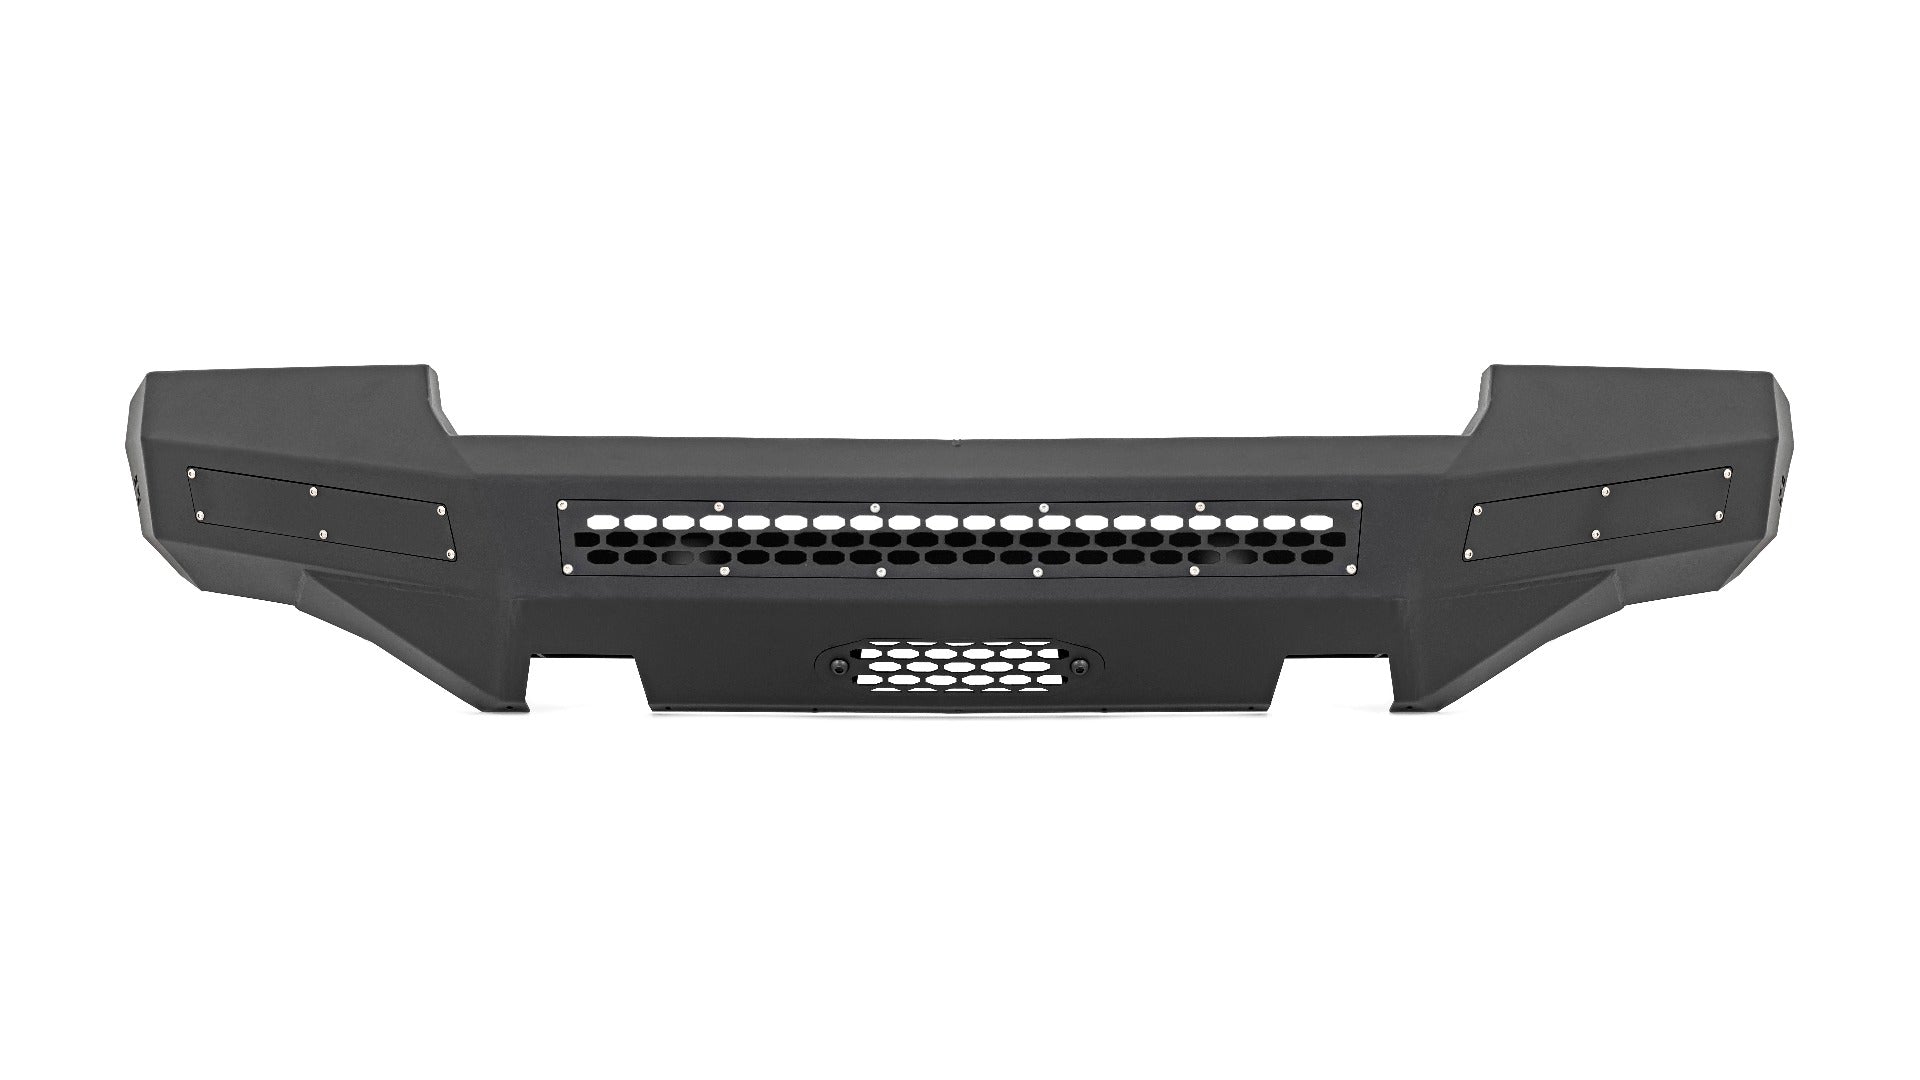 07-13 GMC Sierra 1500 Front High Clearance Bumper Kit Rough Country